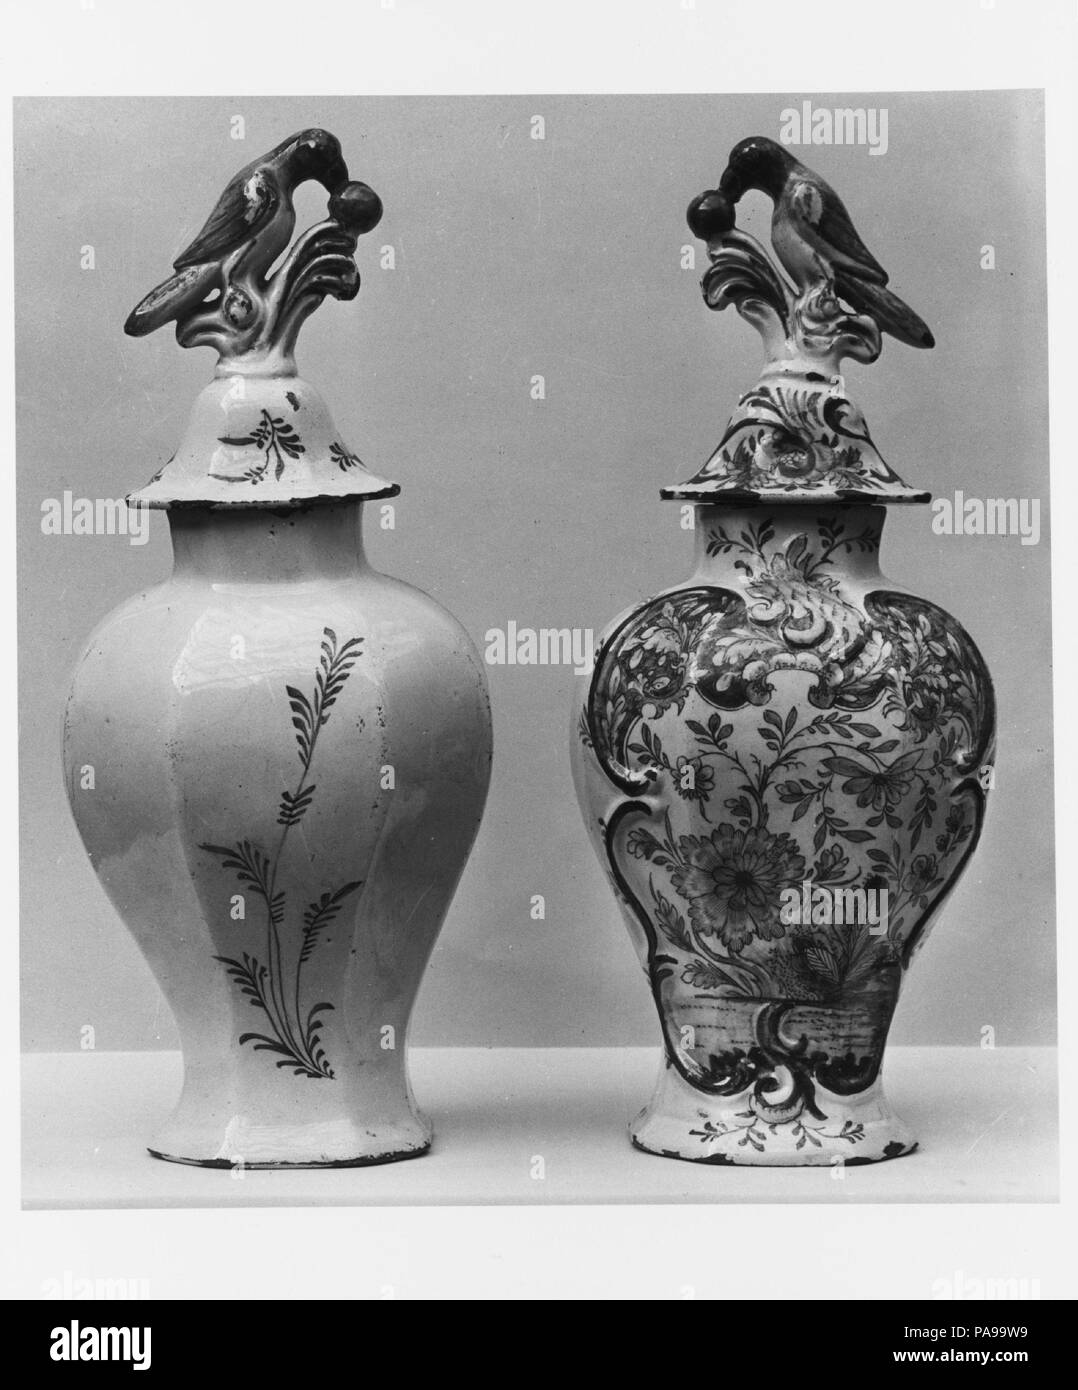 Covered Jar. Culture: Dutch. Designer: Designed by Justus Brouwer (Dutch, active 1739-1775). Dimensions: H. 15 1/2 in. (39.4 cm). Manufacturer: Manufactured by The Porcelain Axe. Date: 1739-75. Museum: Metropolitan Museum of Art, New York, USA. Stock Photo